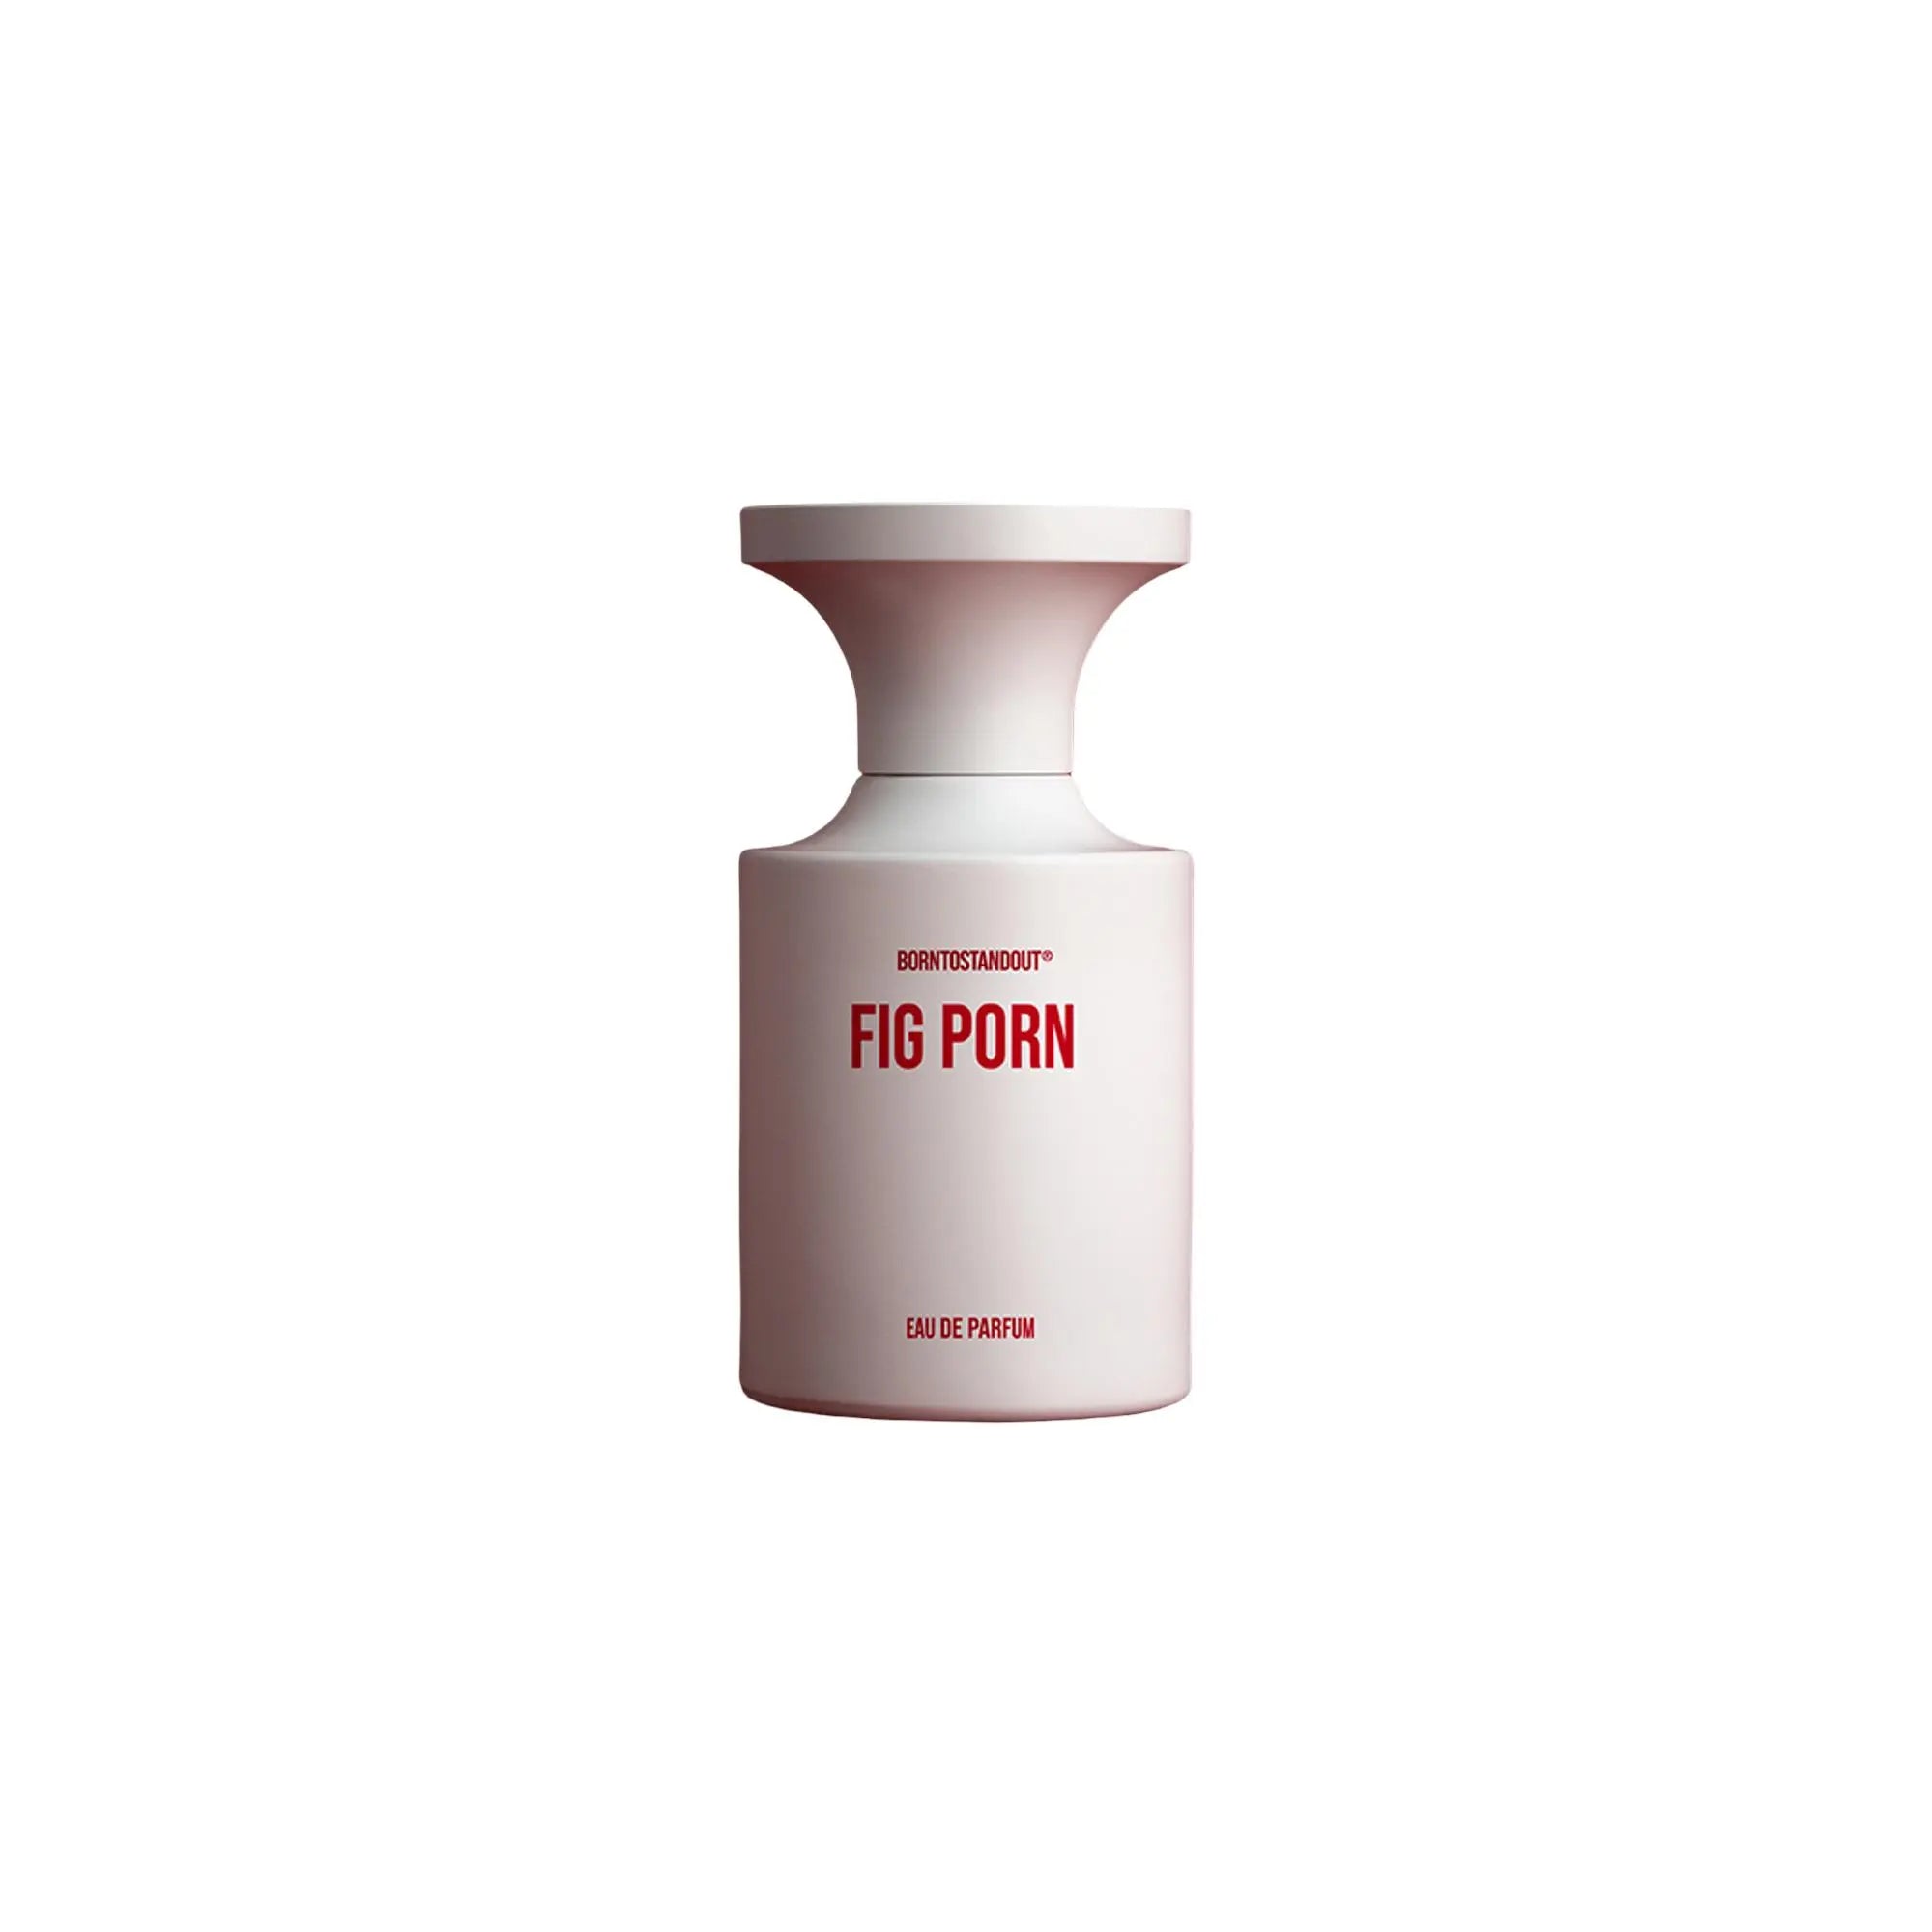 Born to stand out Figue Porno - 50 ml